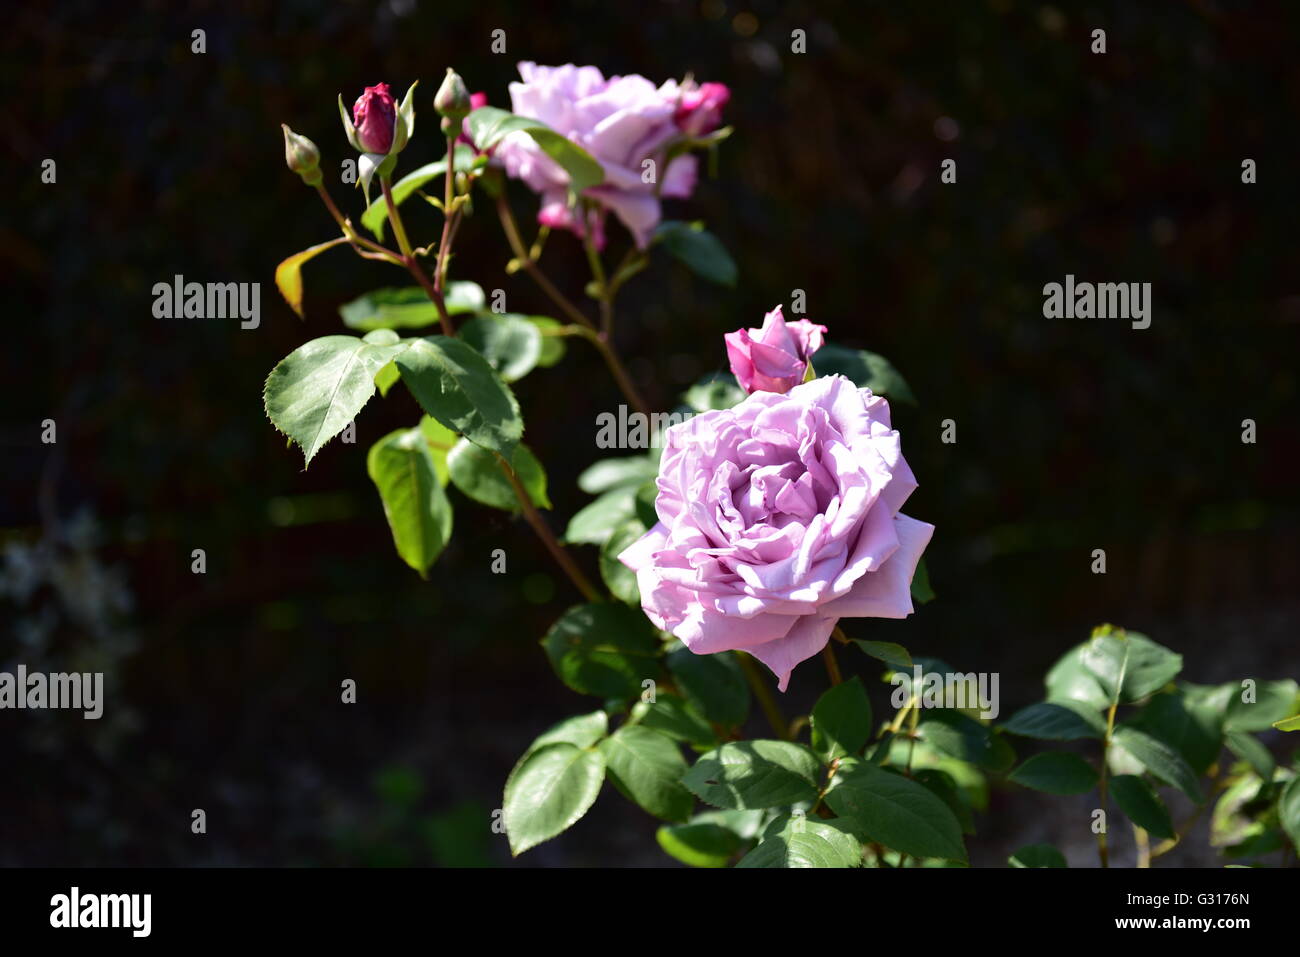 Blue rose growing in a terracotta container outside in a garden Stock Photo